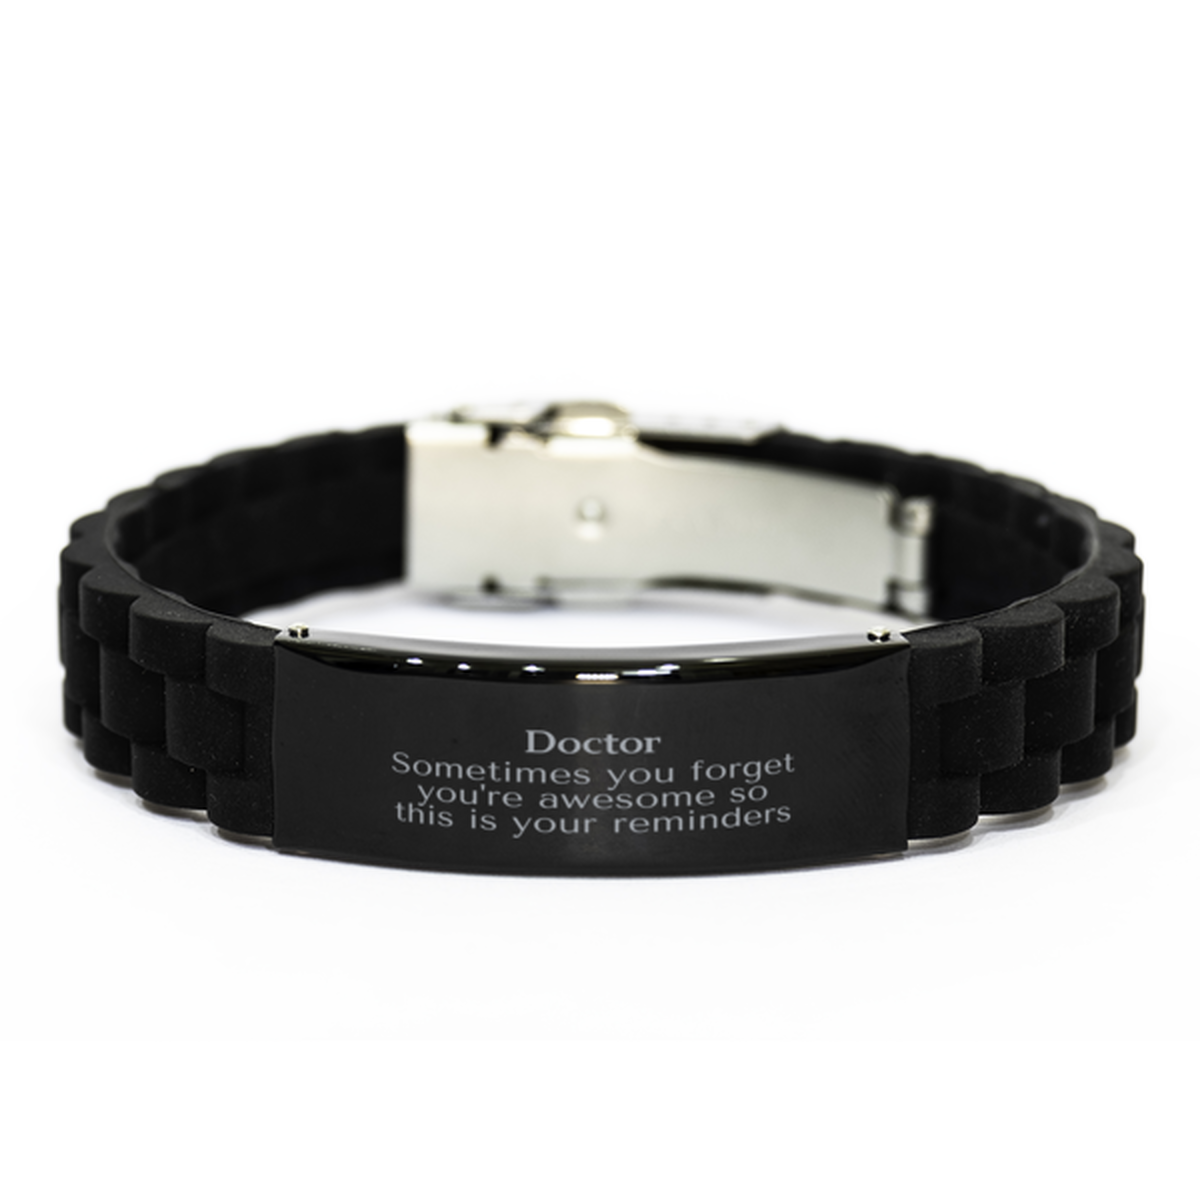 Sentimental Doctor Black Glidelock Clasp Bracelet, Doctor Sometimes you forget you're awesome so this is your reminders, Graduation Christmas Birthday Gifts for Doctor, Men, Women, Coworkers